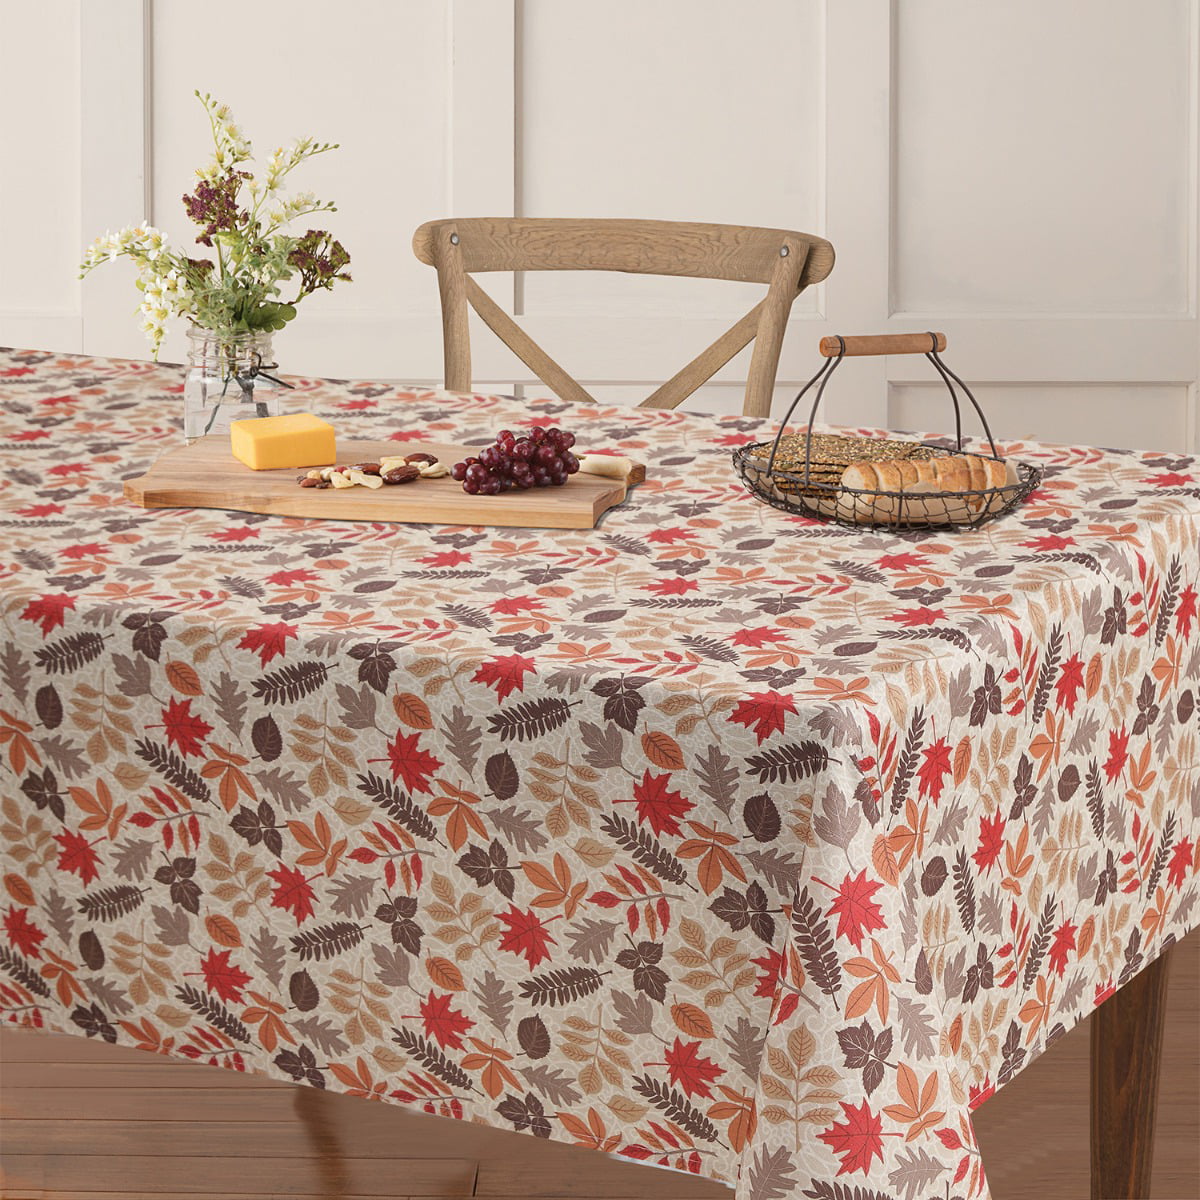 Fall Decoration Autumn Retro Floral Embroidery Table Runner Tablecloth Vintage Linen 60s Linen